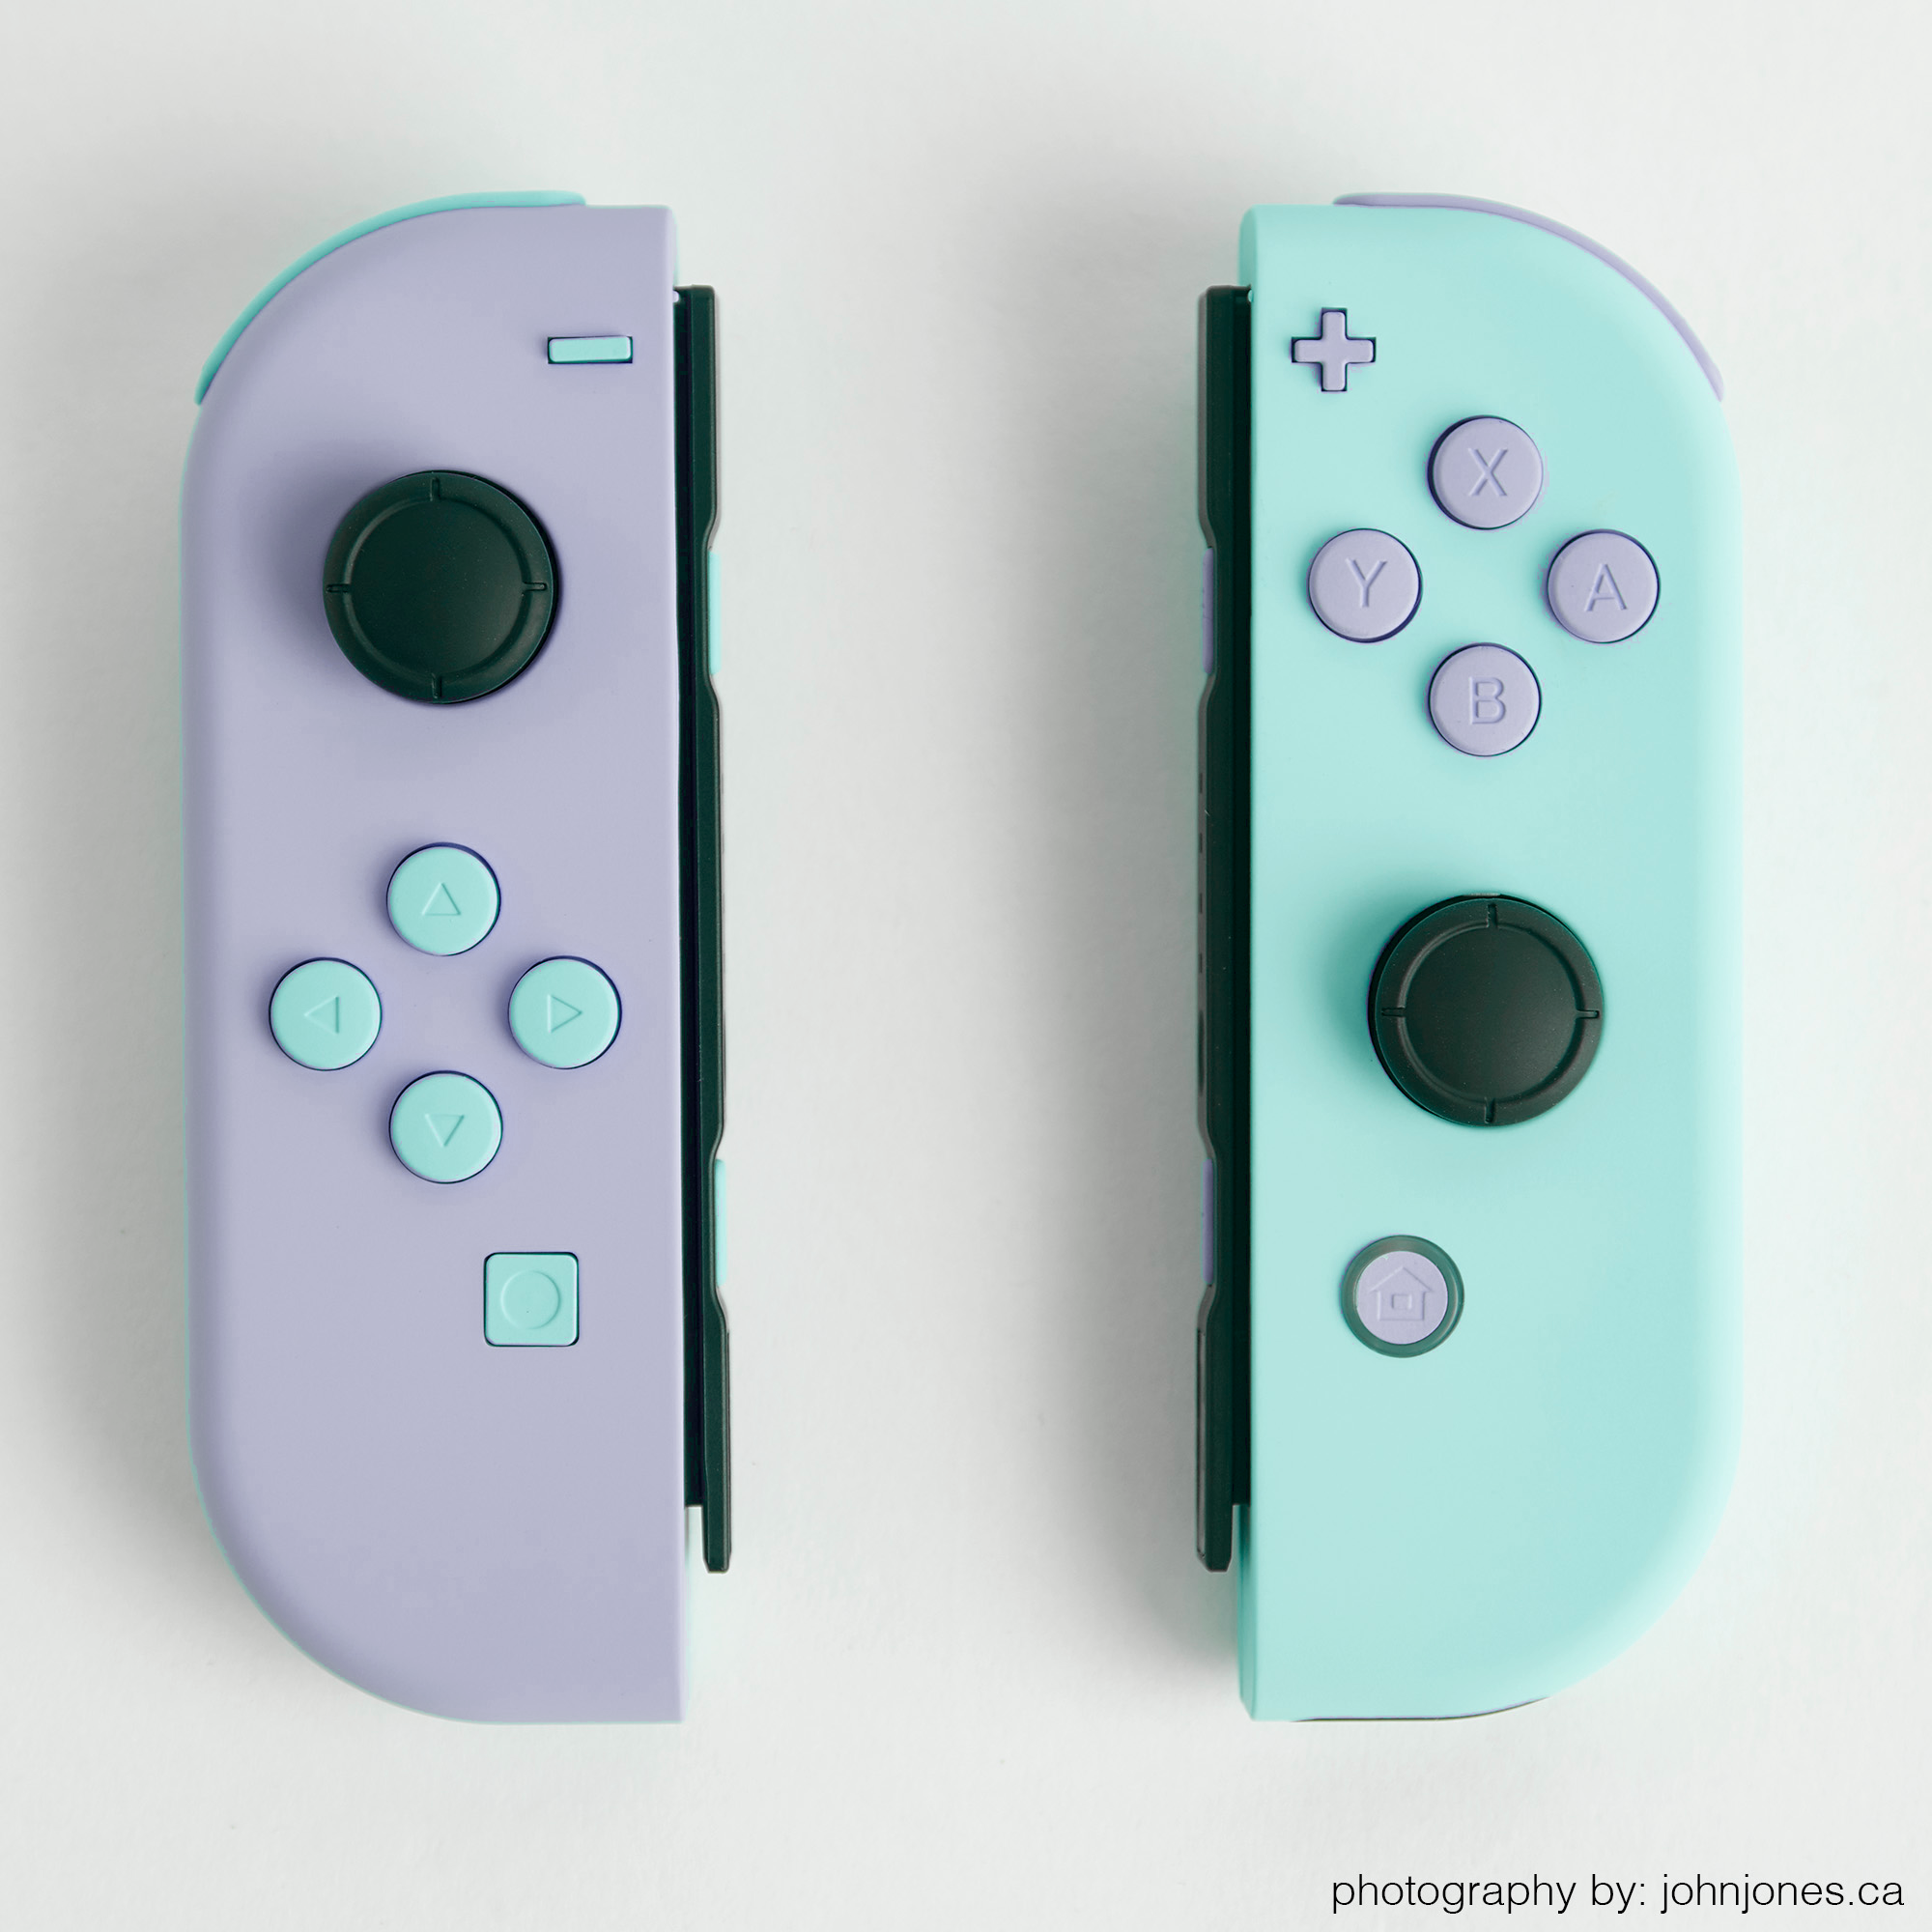 Here's where to pre-order the new pastel Joy-Con controllers for